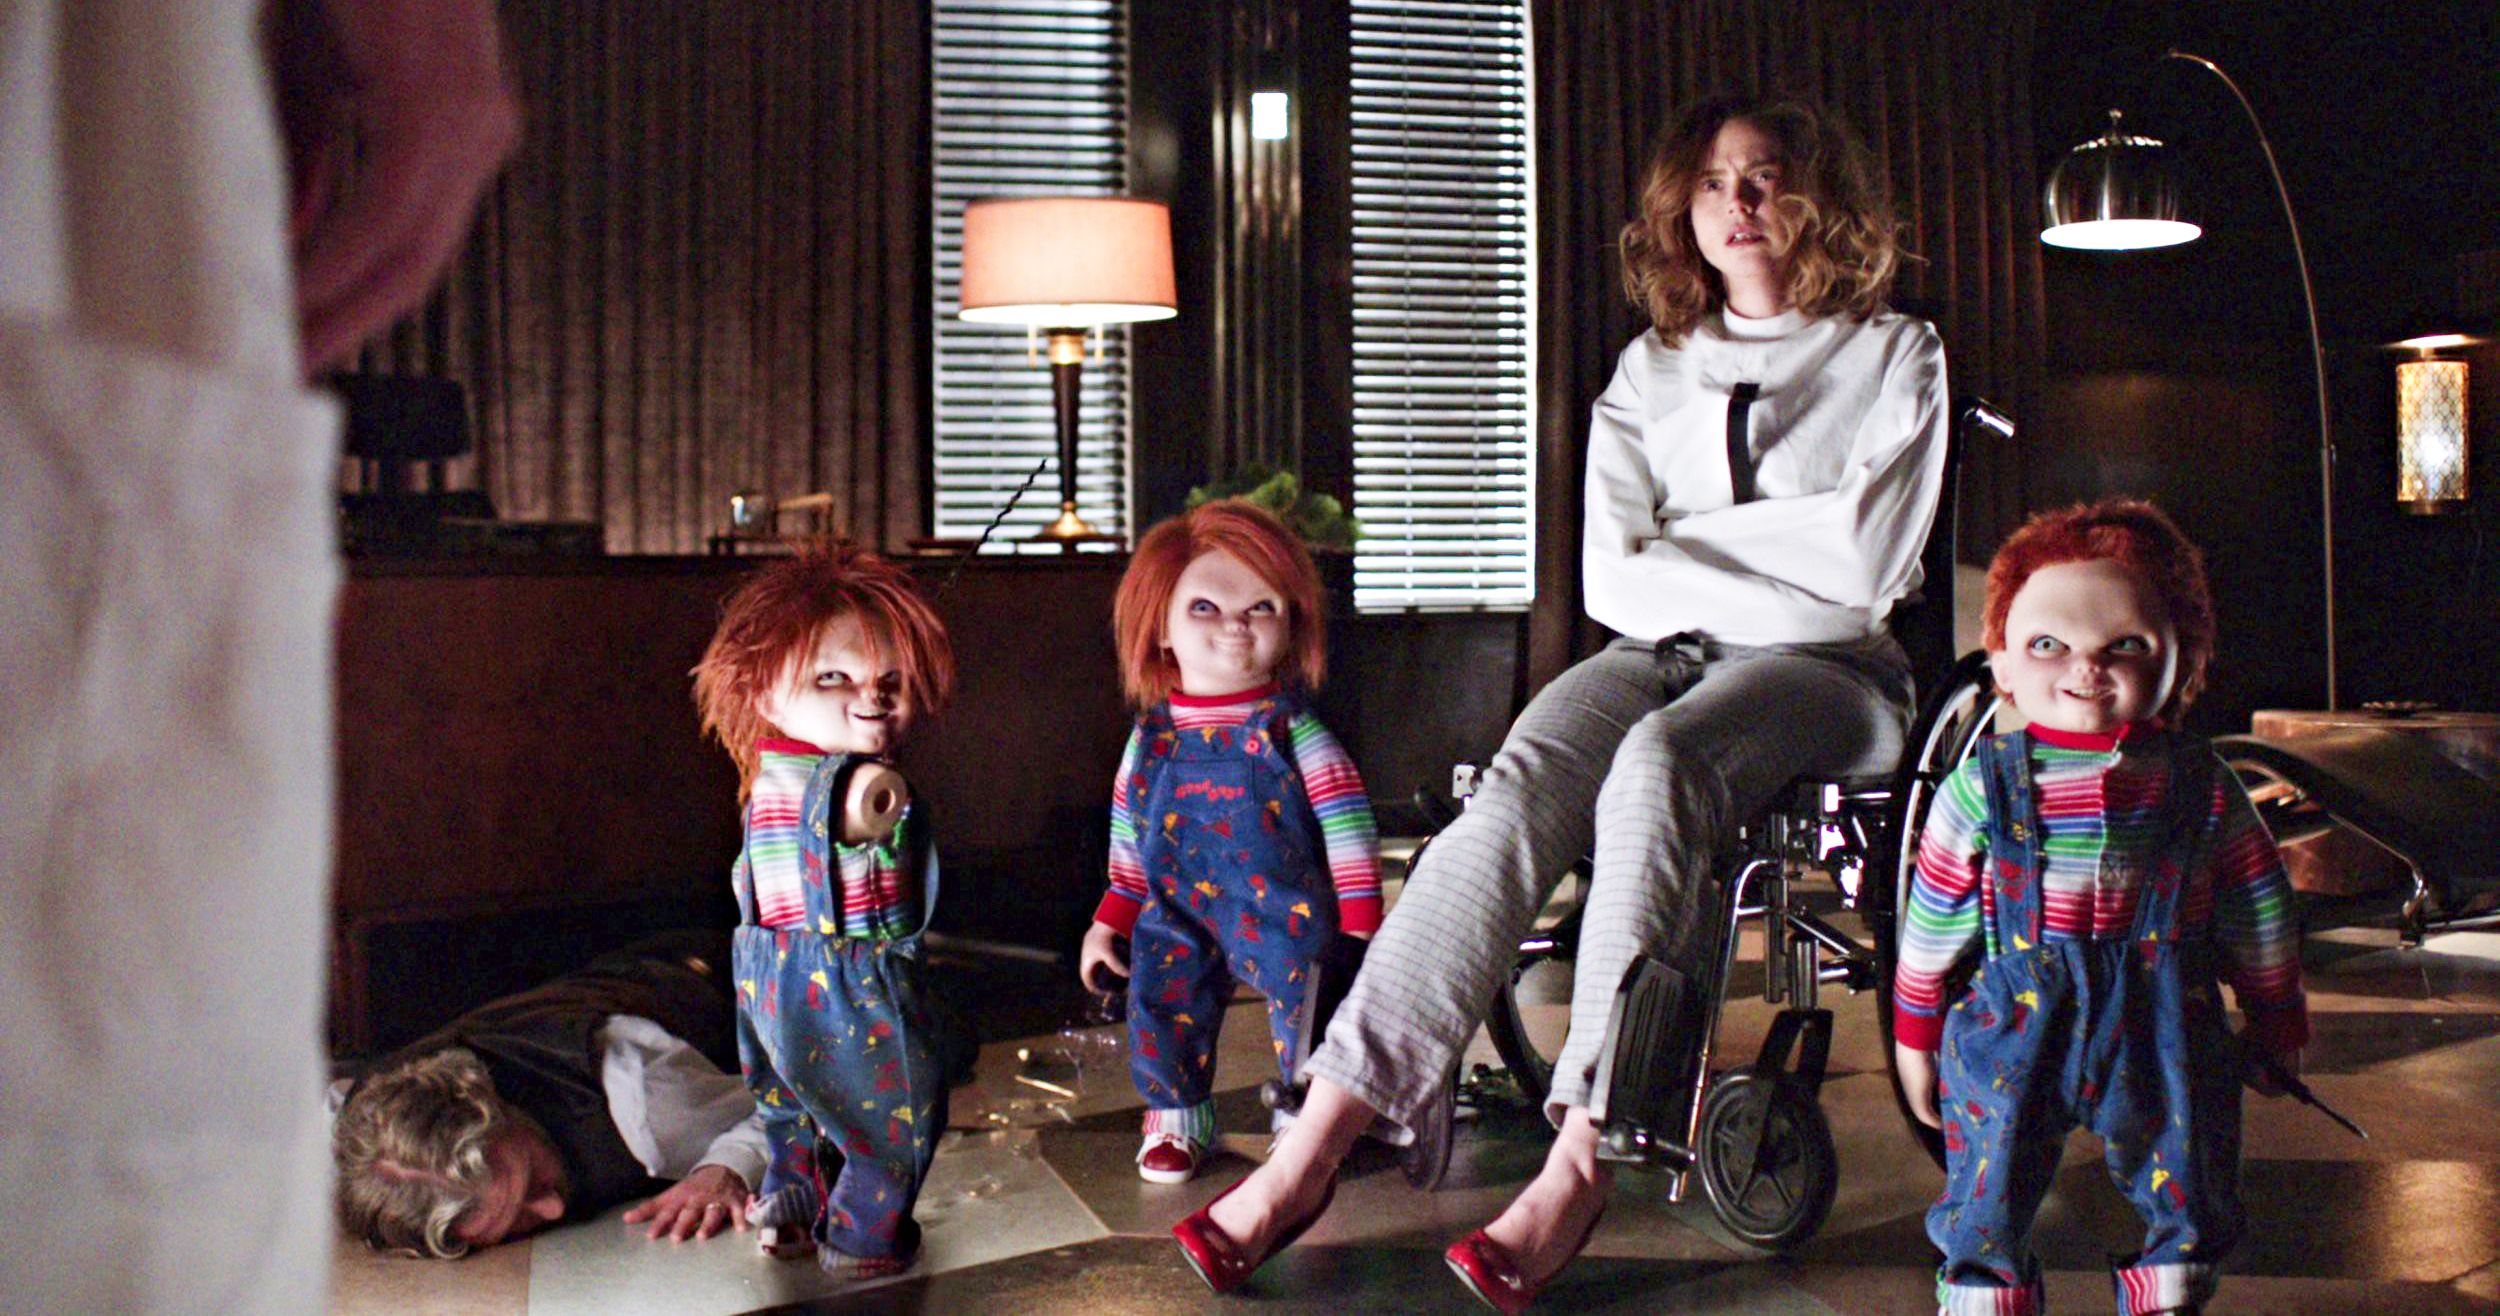 Chucky TV Show Brings Back Child's Play Franchise Favorite Fiona Dourif